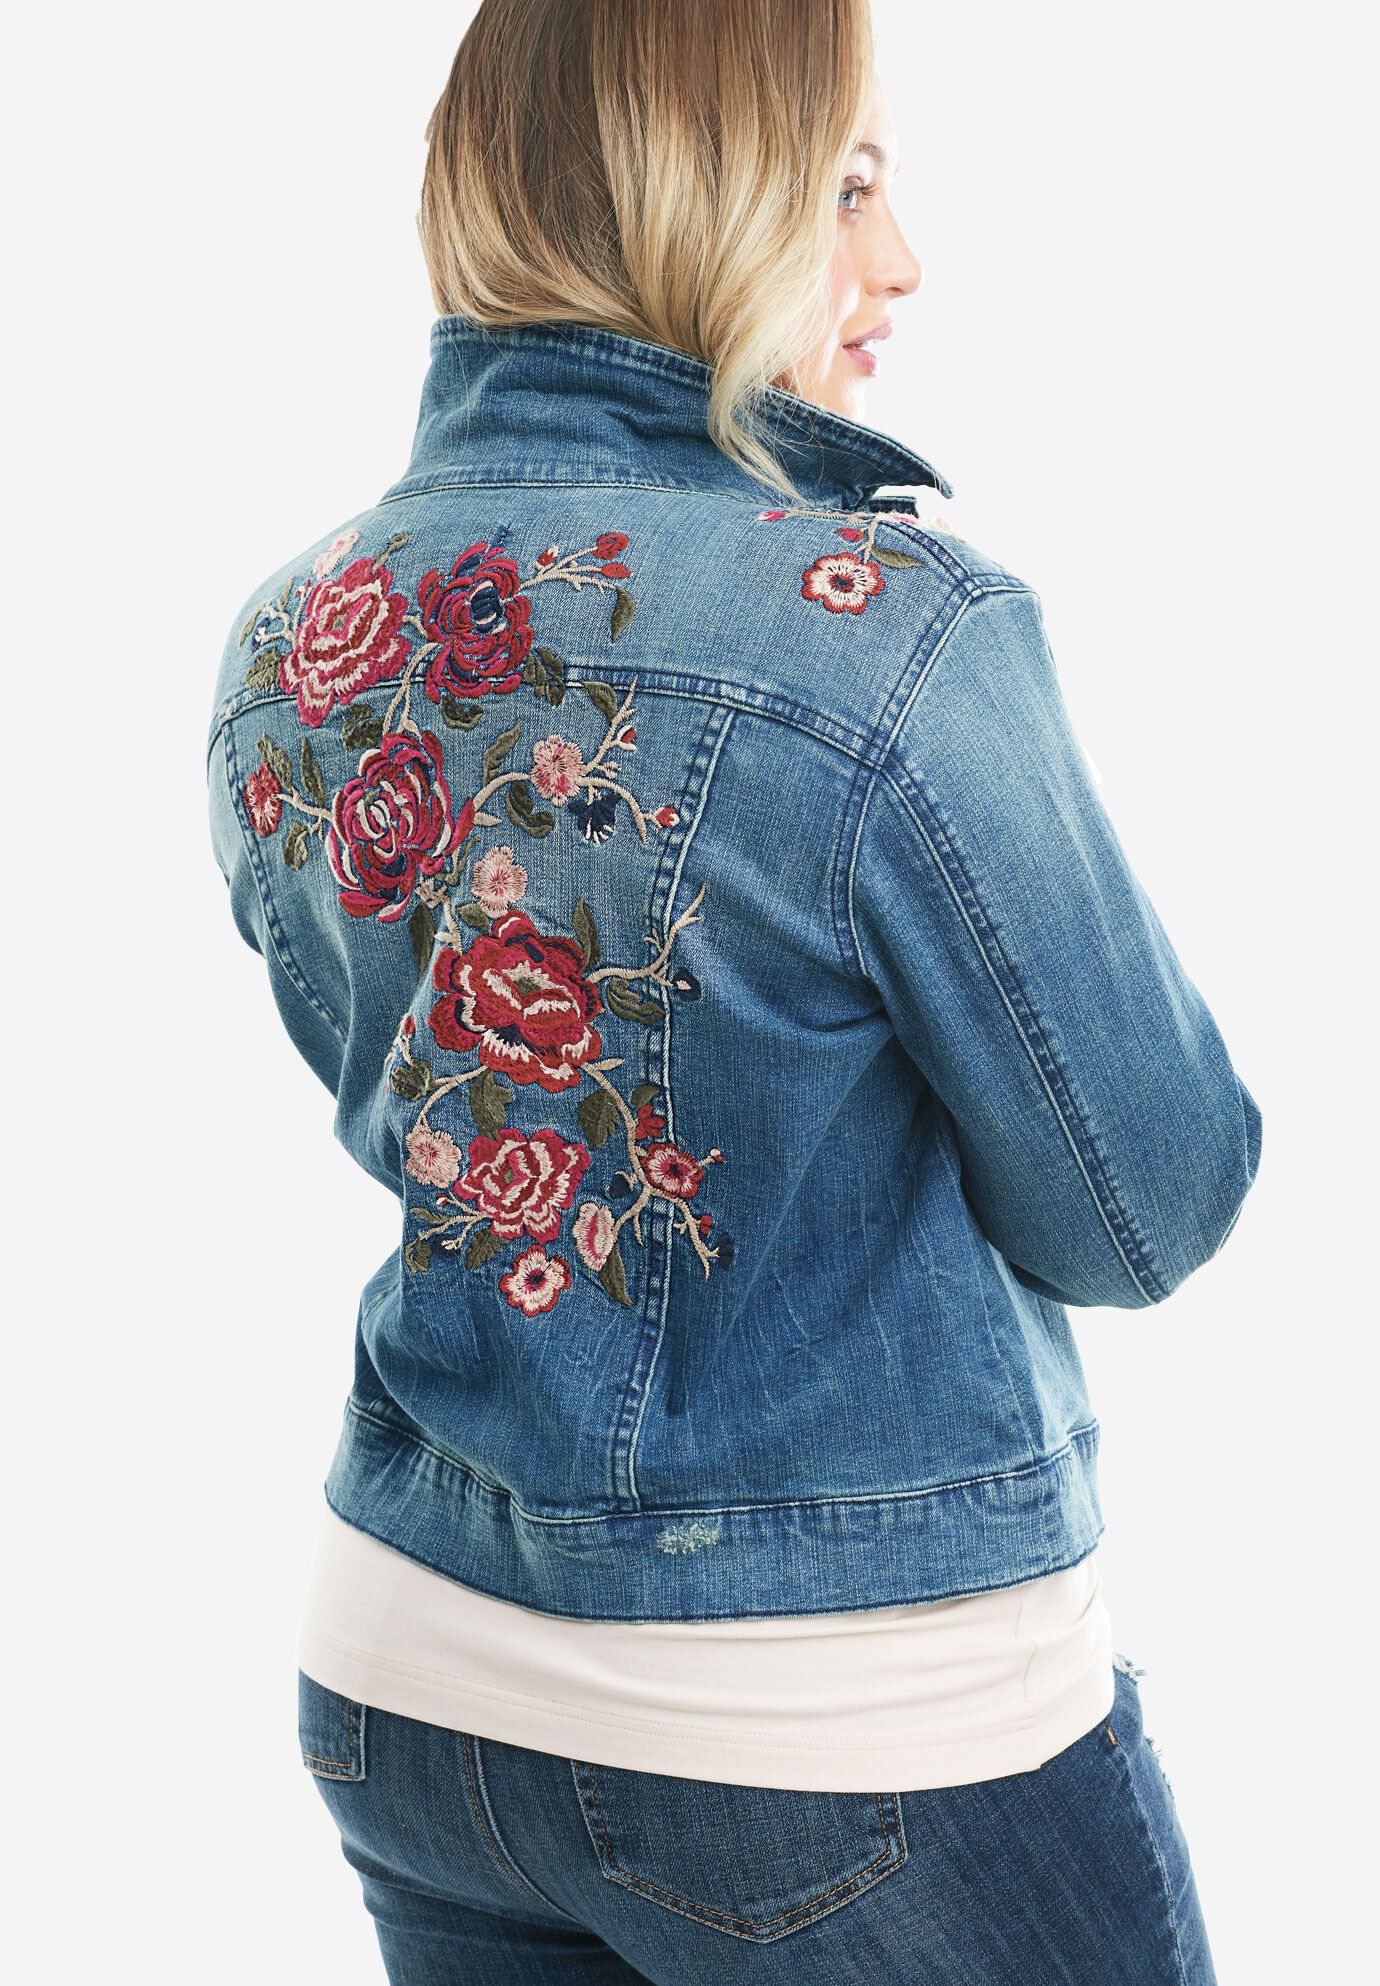 embroidered jean jacket